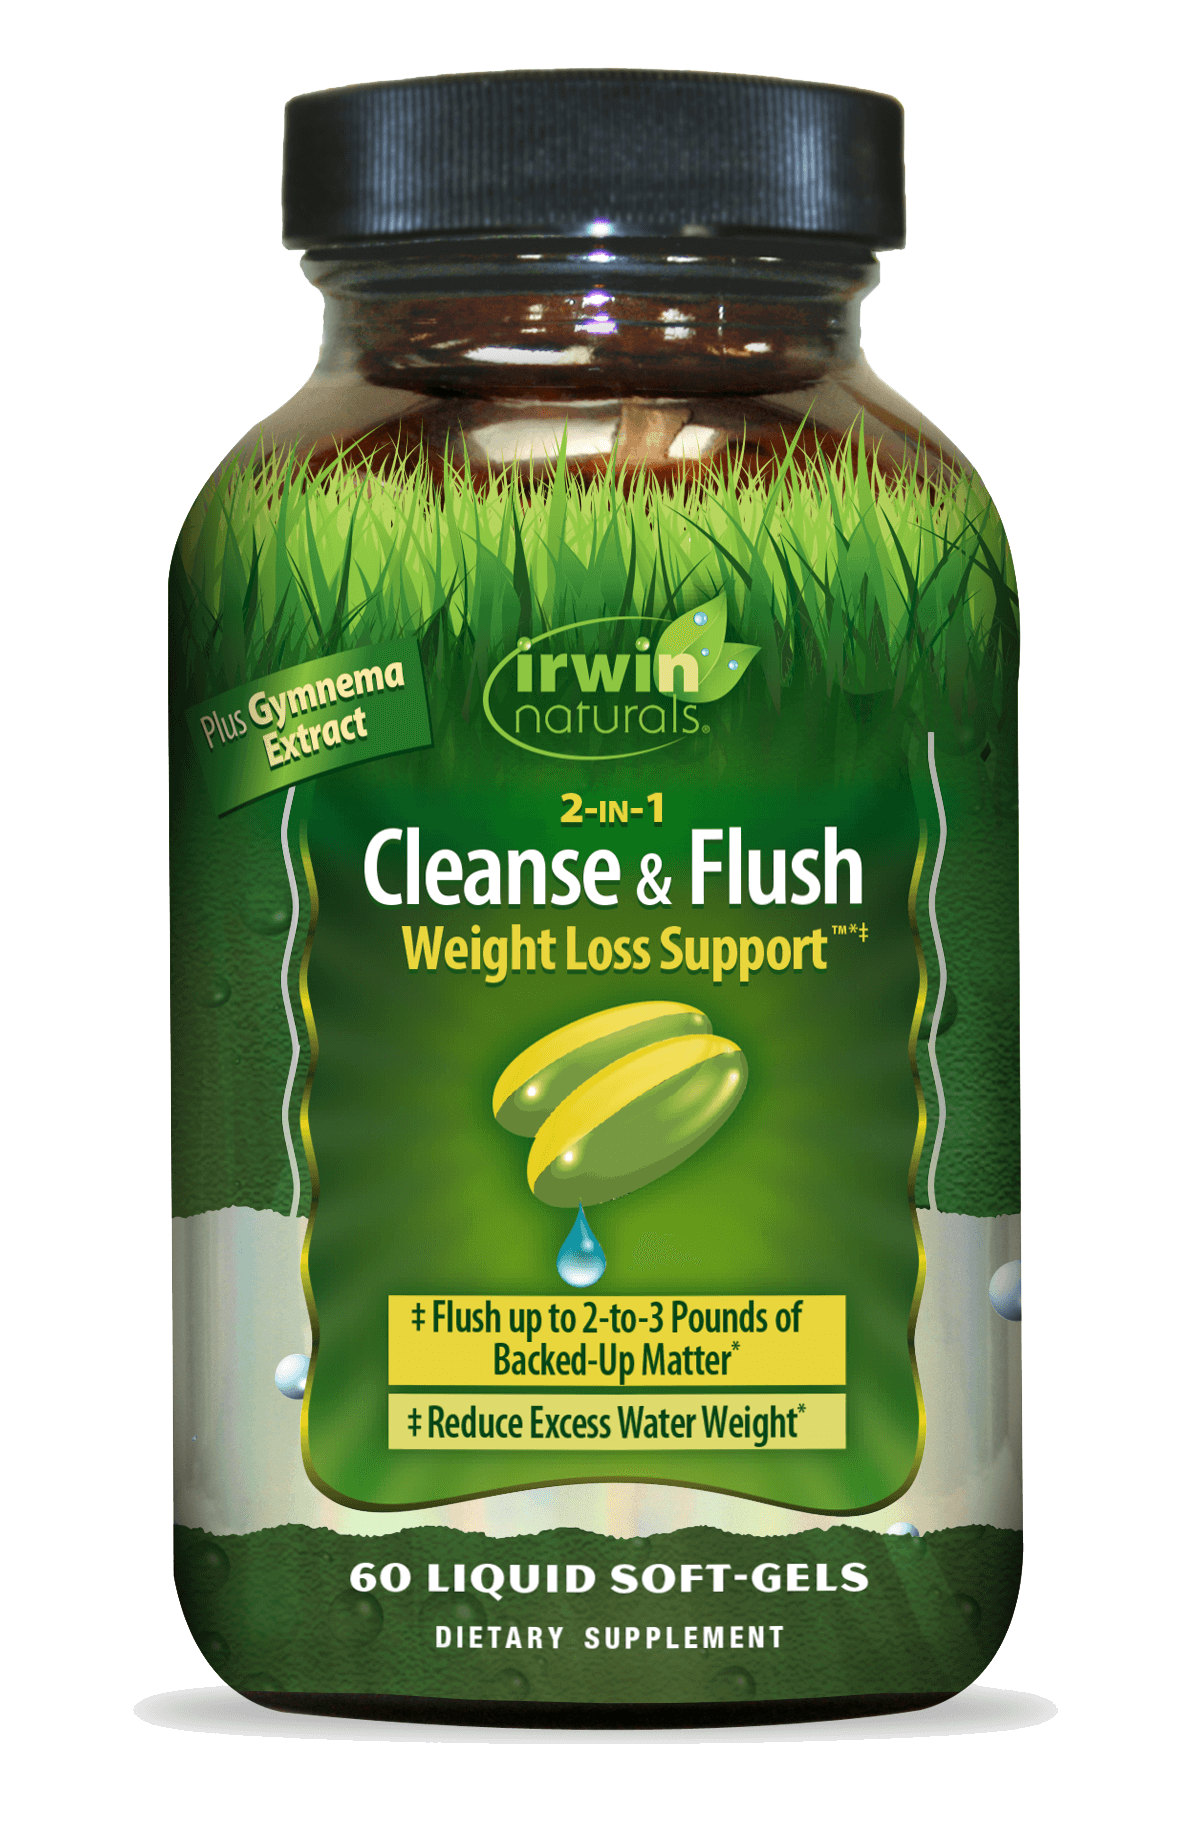 2-in-1 Cleanse & Flush Weight Loss Support – Irwin Naturals